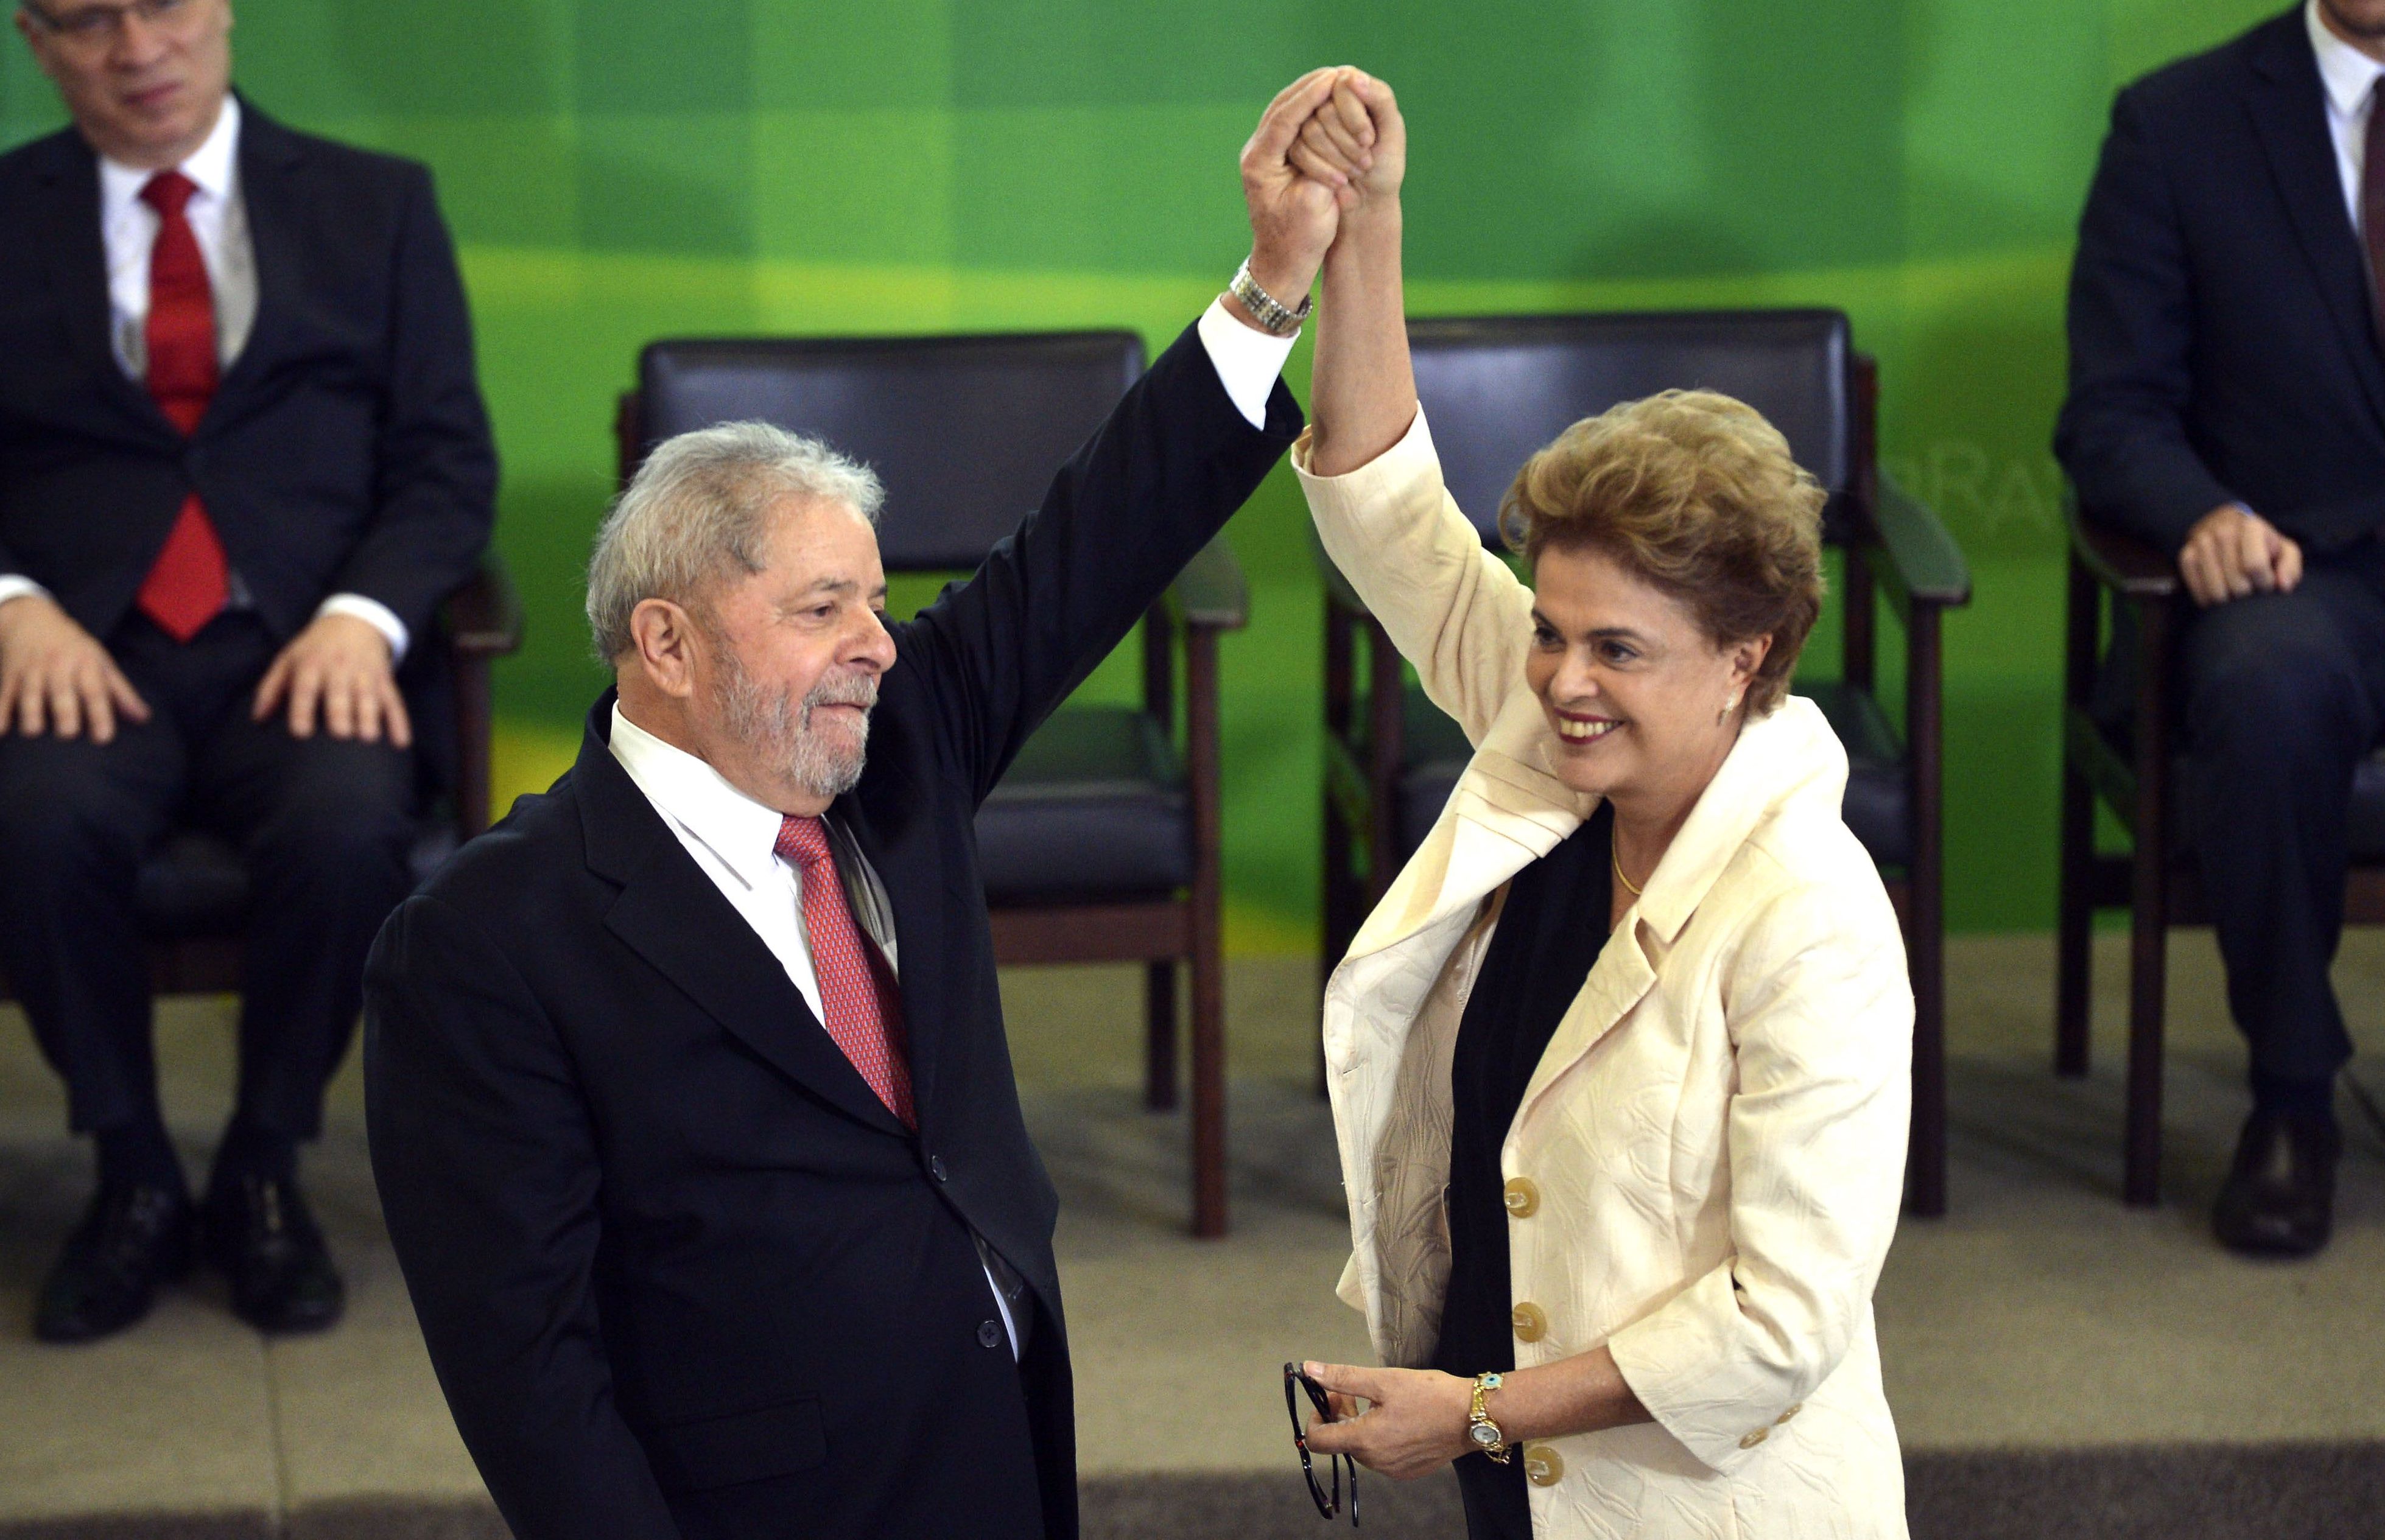 Ex-President Dilma Rousseff defends Lula da Silva while he remains behind bars